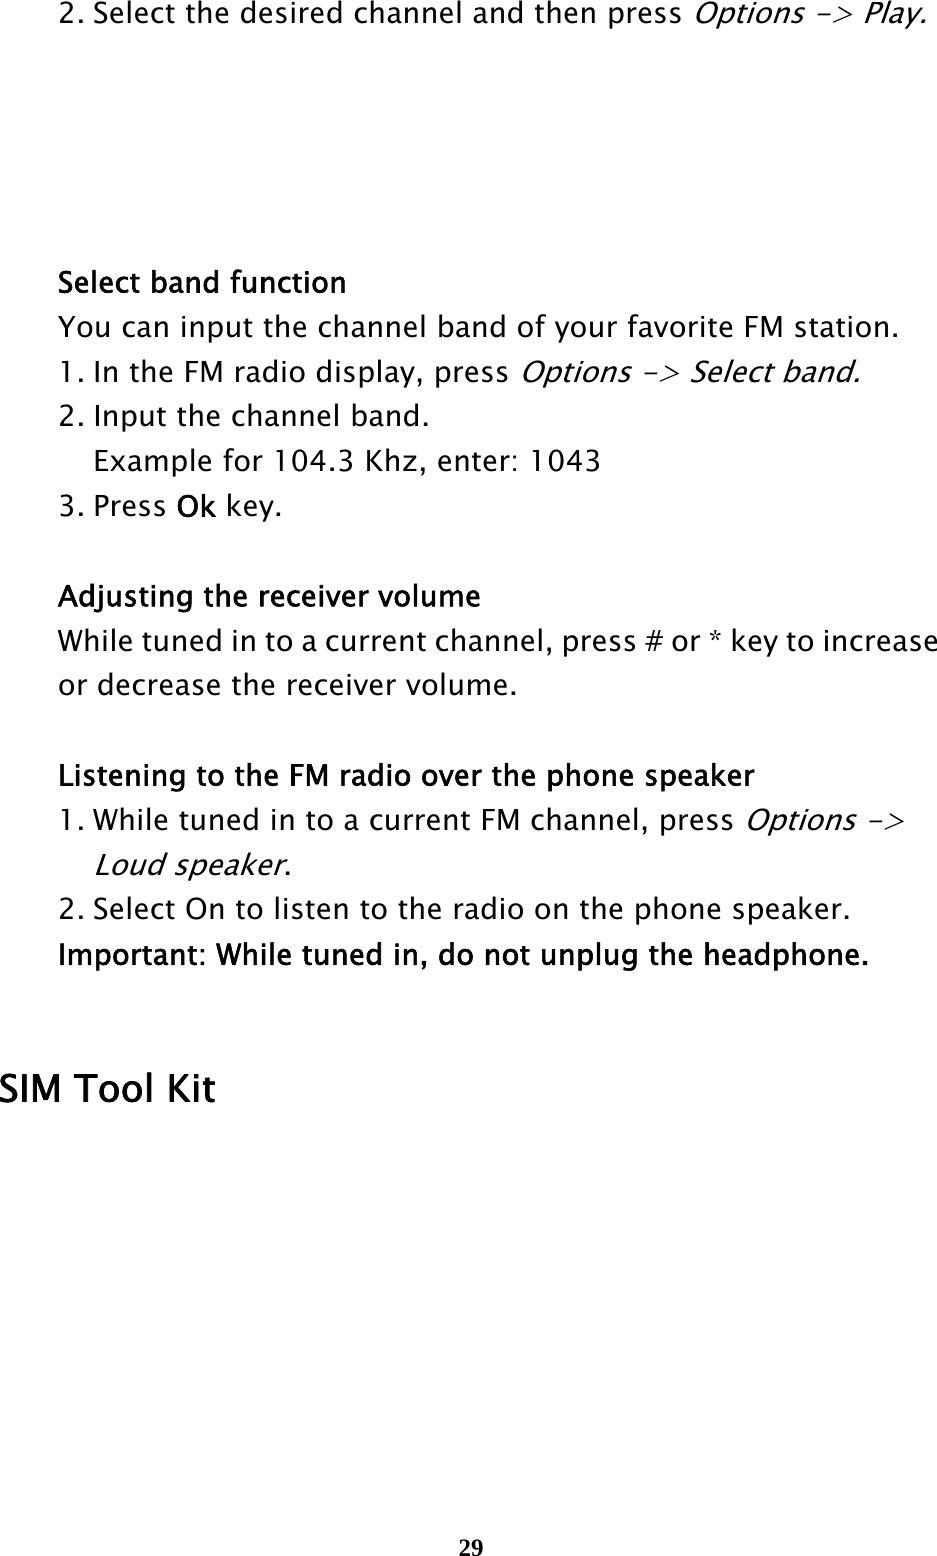  29  2. Select the desired channel and then press Options -&gt; Play.          Select band function  You can input the channel band of your favorite FM station.     1. In the FM radio display, press Options -&gt; Select band.    2. Input the channel band.       Example for 104.3 Khz, enter: 1043  3. Press Ok key.     Adjusting the receiver volume   While tuned in to a current channel, press # or * key to increase     or decrease the receiver volume.    Listening to the FM radio over the phone speaker   1. While tuned in to a current FM channel, press Options -&gt;     Loud speaker.    2. Select On to listen to the radio on the phone speaker.  Important: While tuned in, do not unplug the headphone.     SIM Tool Kit       